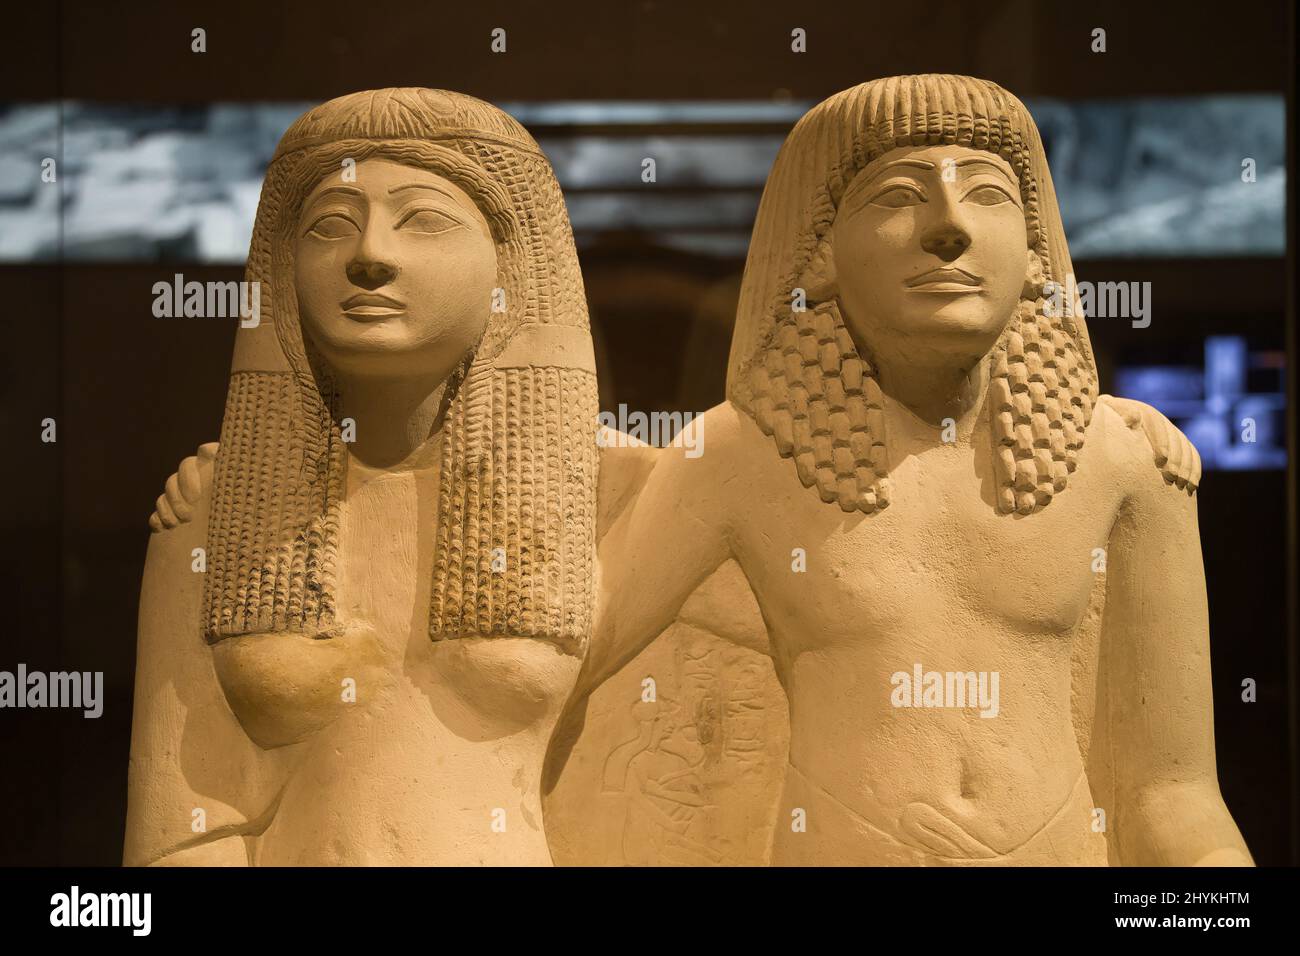 Torino, Italy - August 14, 2021: Statue of the craftsman Pendua and of his wife Nefertari at the Egyptian Museum of Turin, Italy. Stock Photo